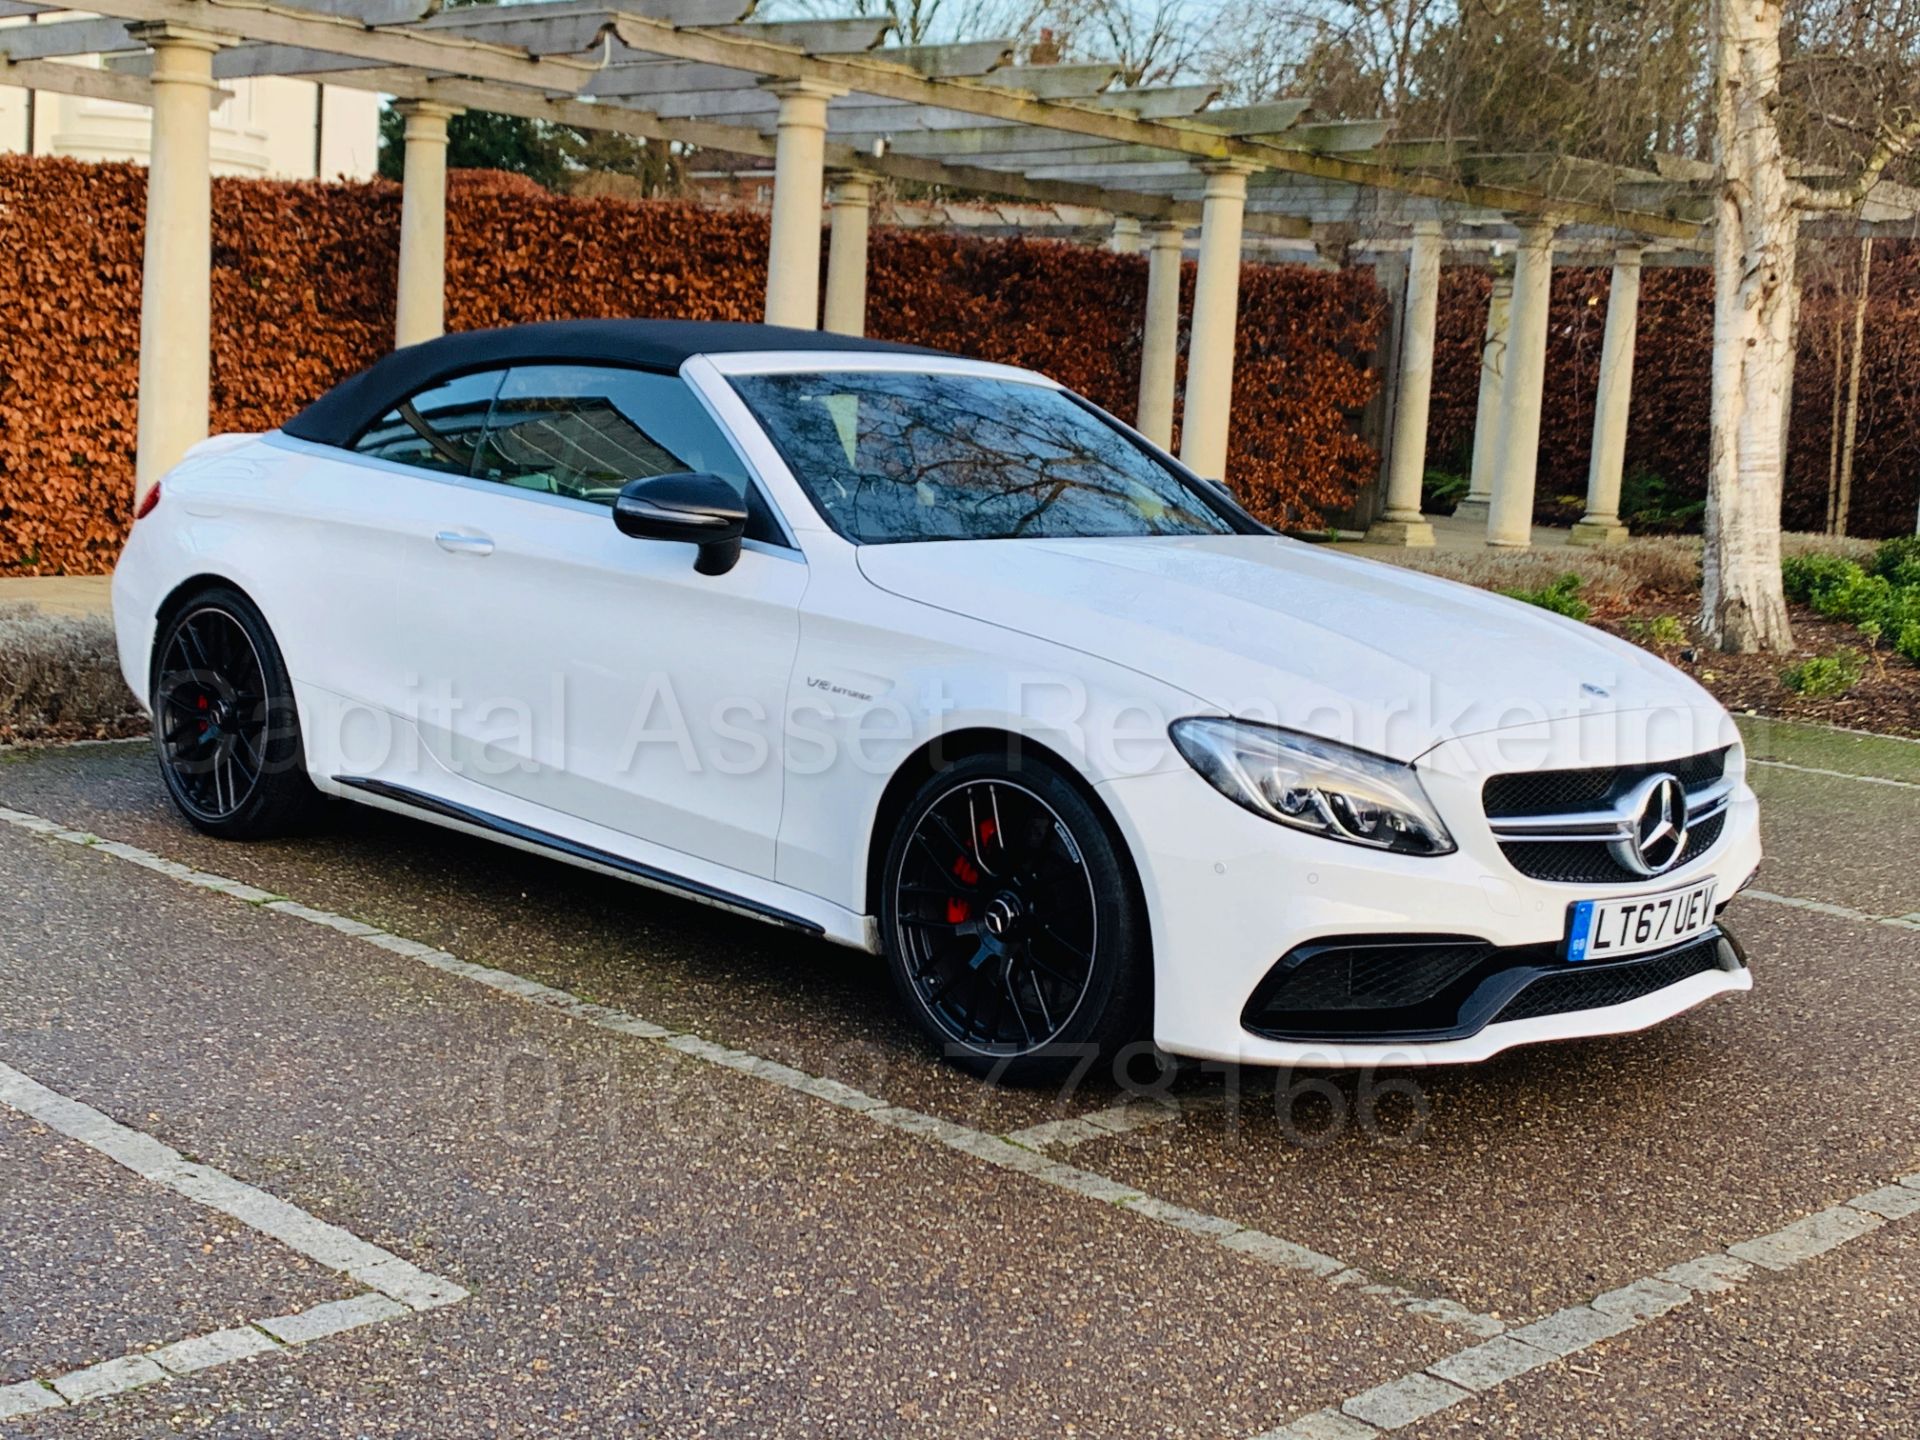 (On Sale) MERCEDES-BENZ AMG C63-S *CABRIOLET* (67 REG) '4.0 BI-TURBO -510 BHP - AUTO' *FULLY LOADED* - Image 4 of 79